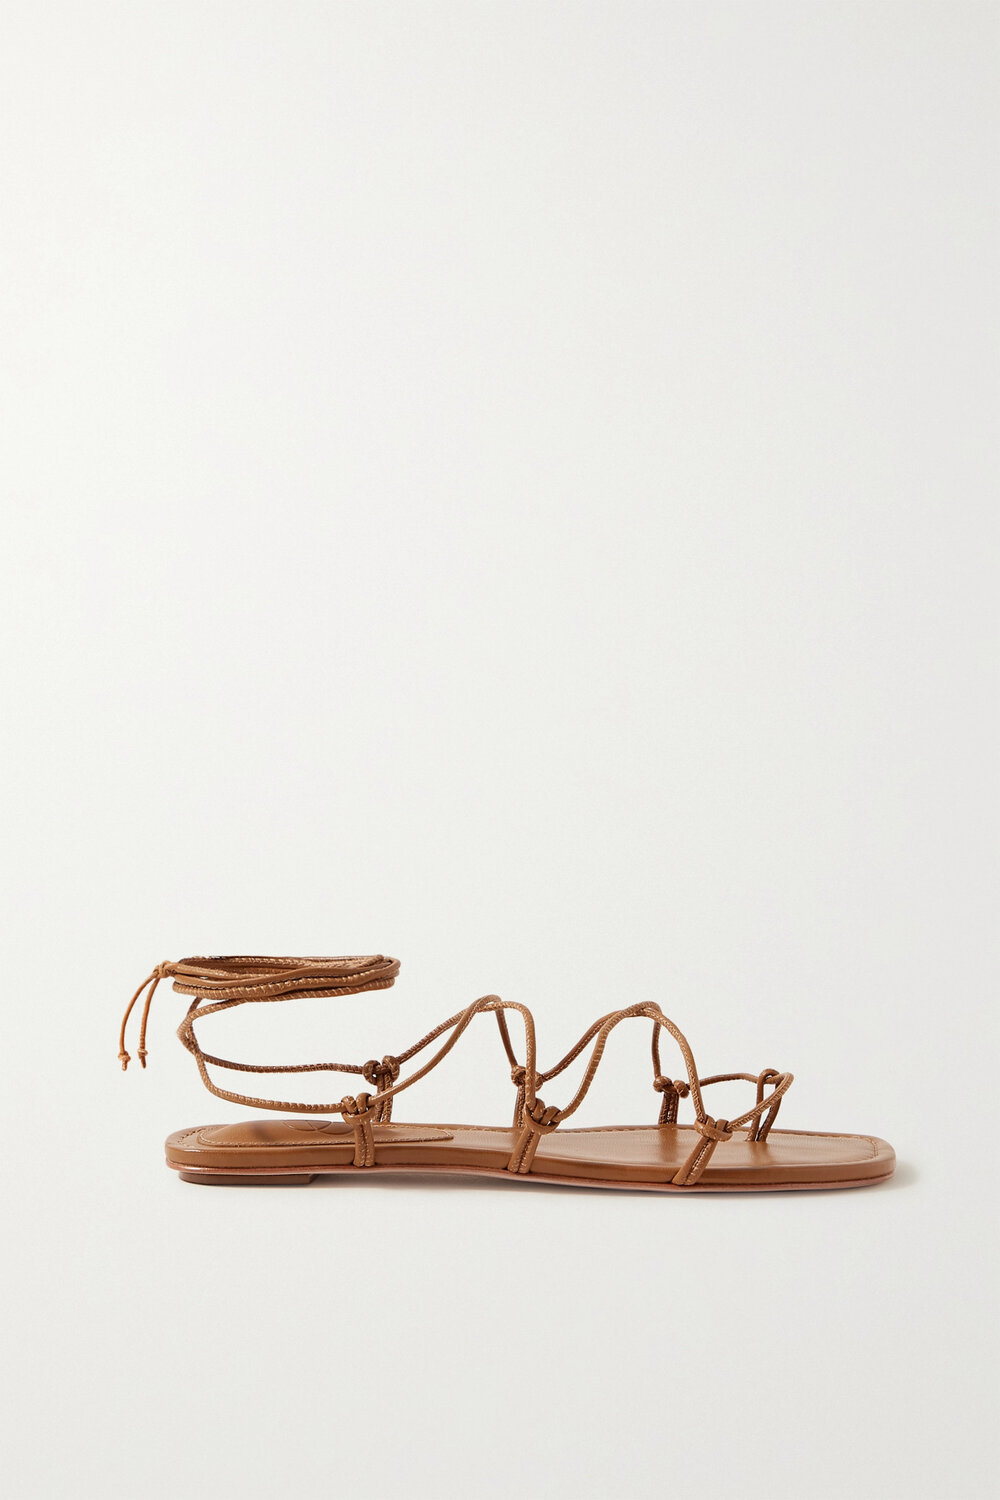 Porte and Paire, Sandals, £190